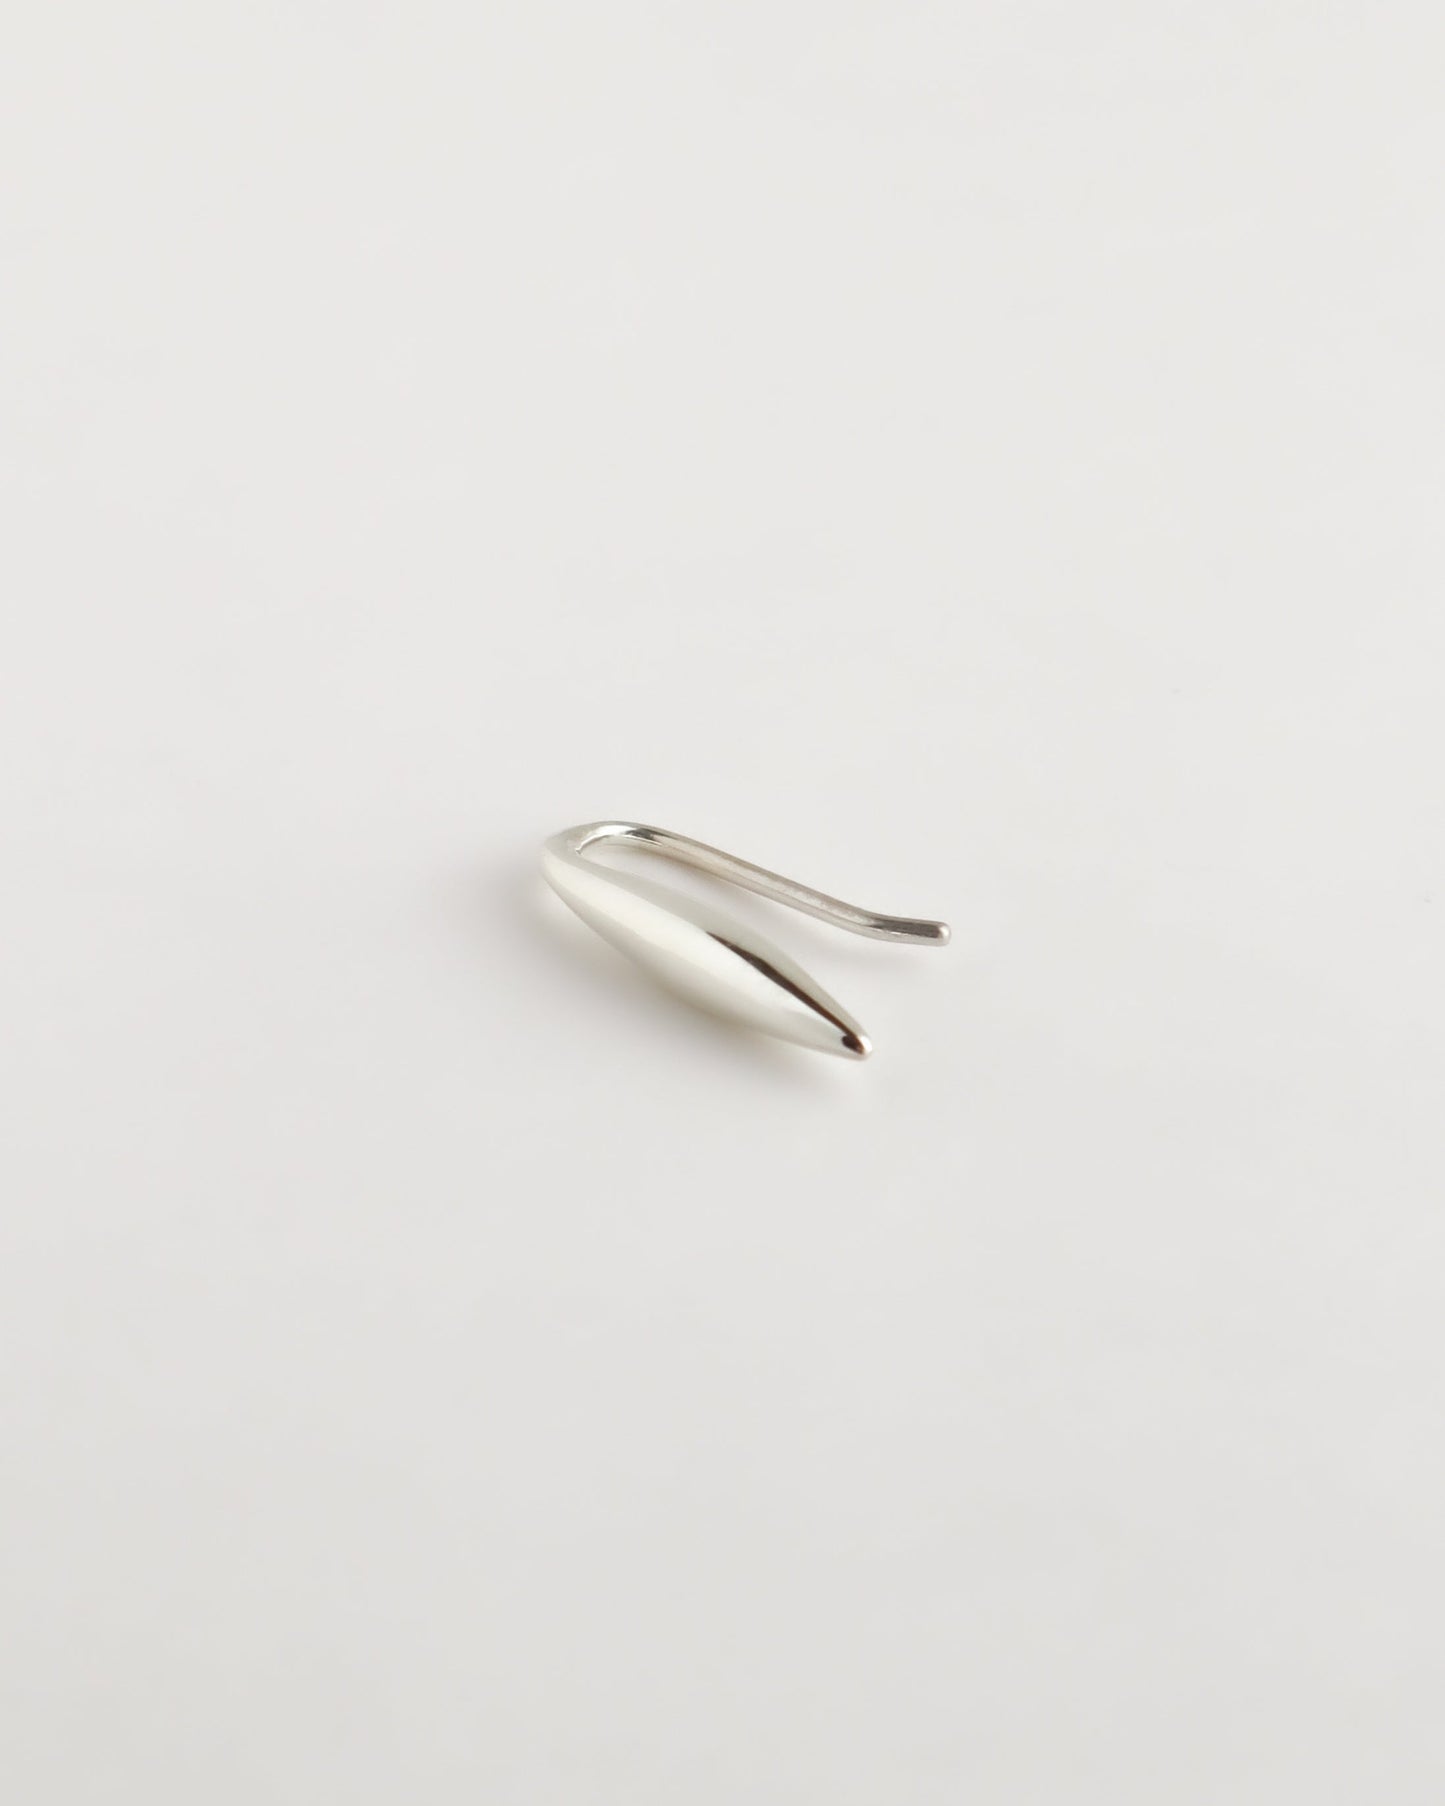 SEED PIERCE-Small (Paired)